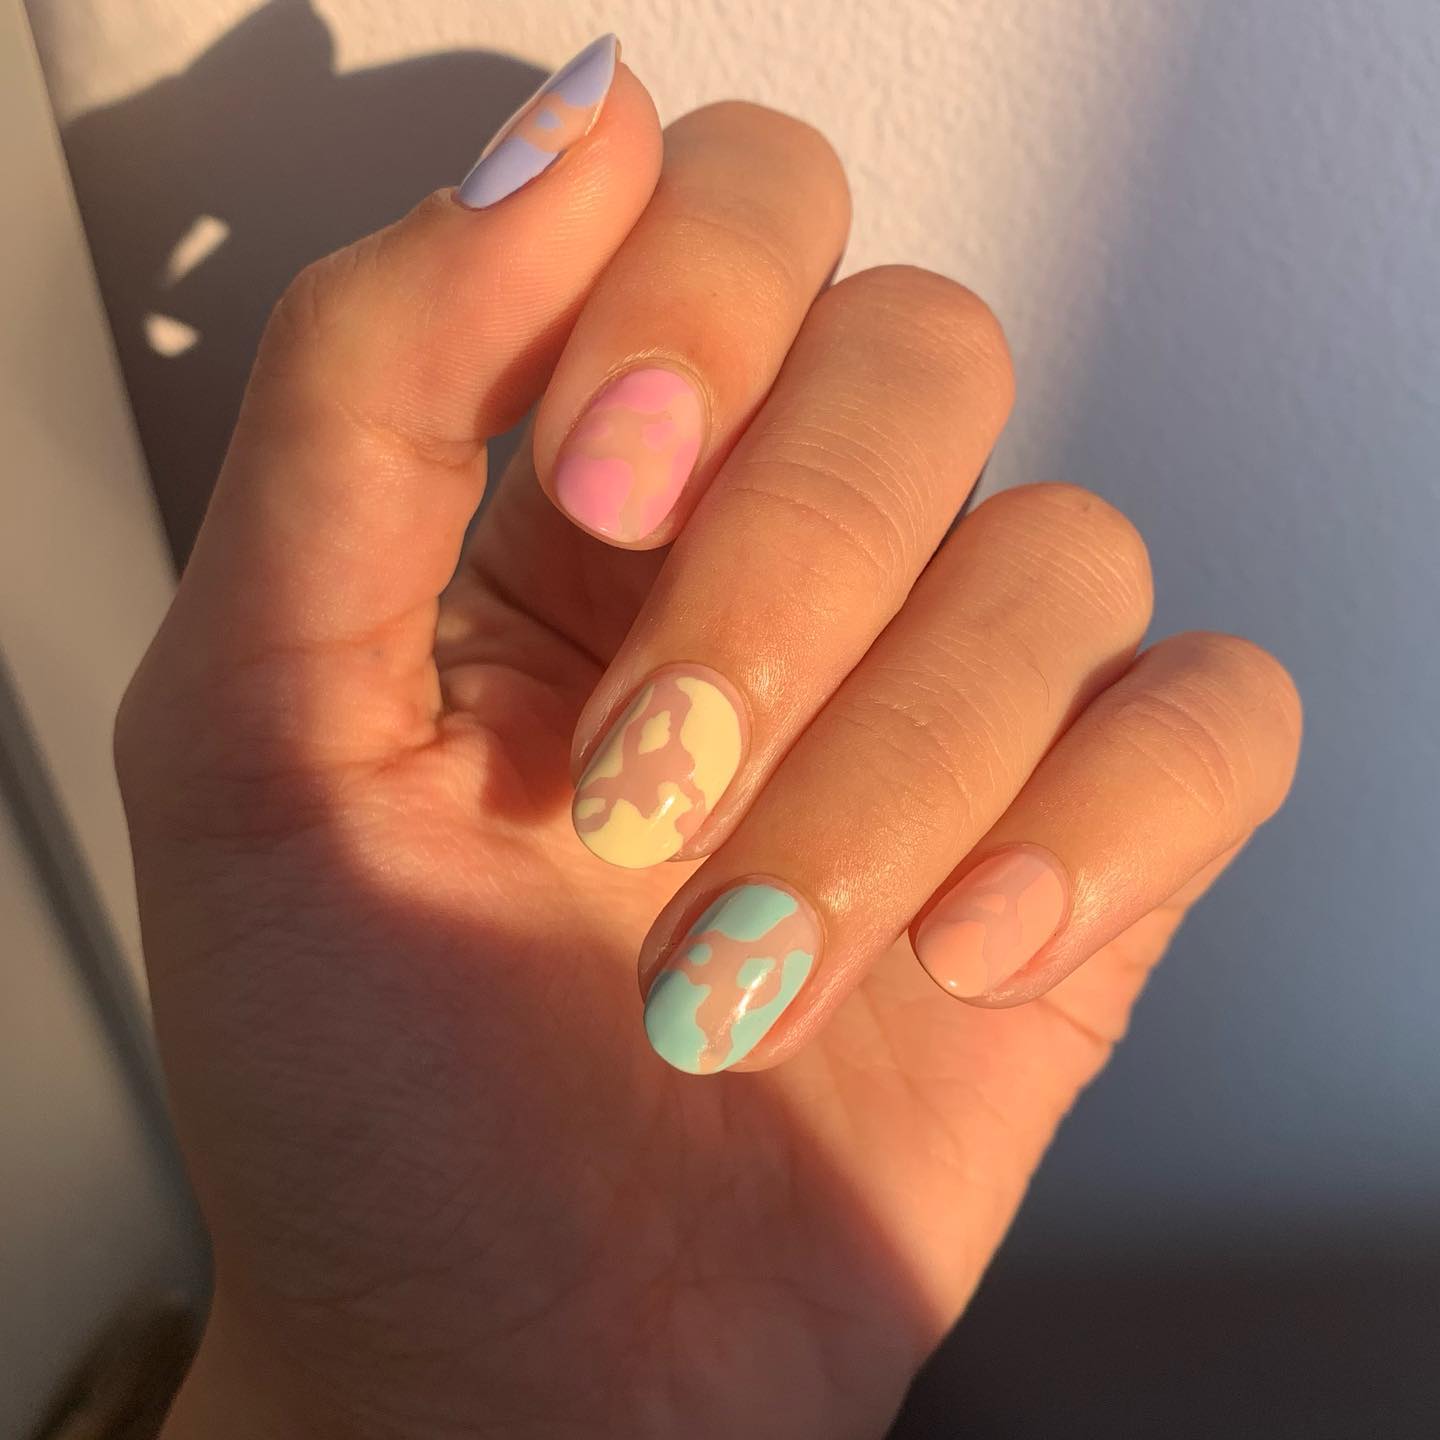 Short Pastel Rainbow Nails with Cow Print Design